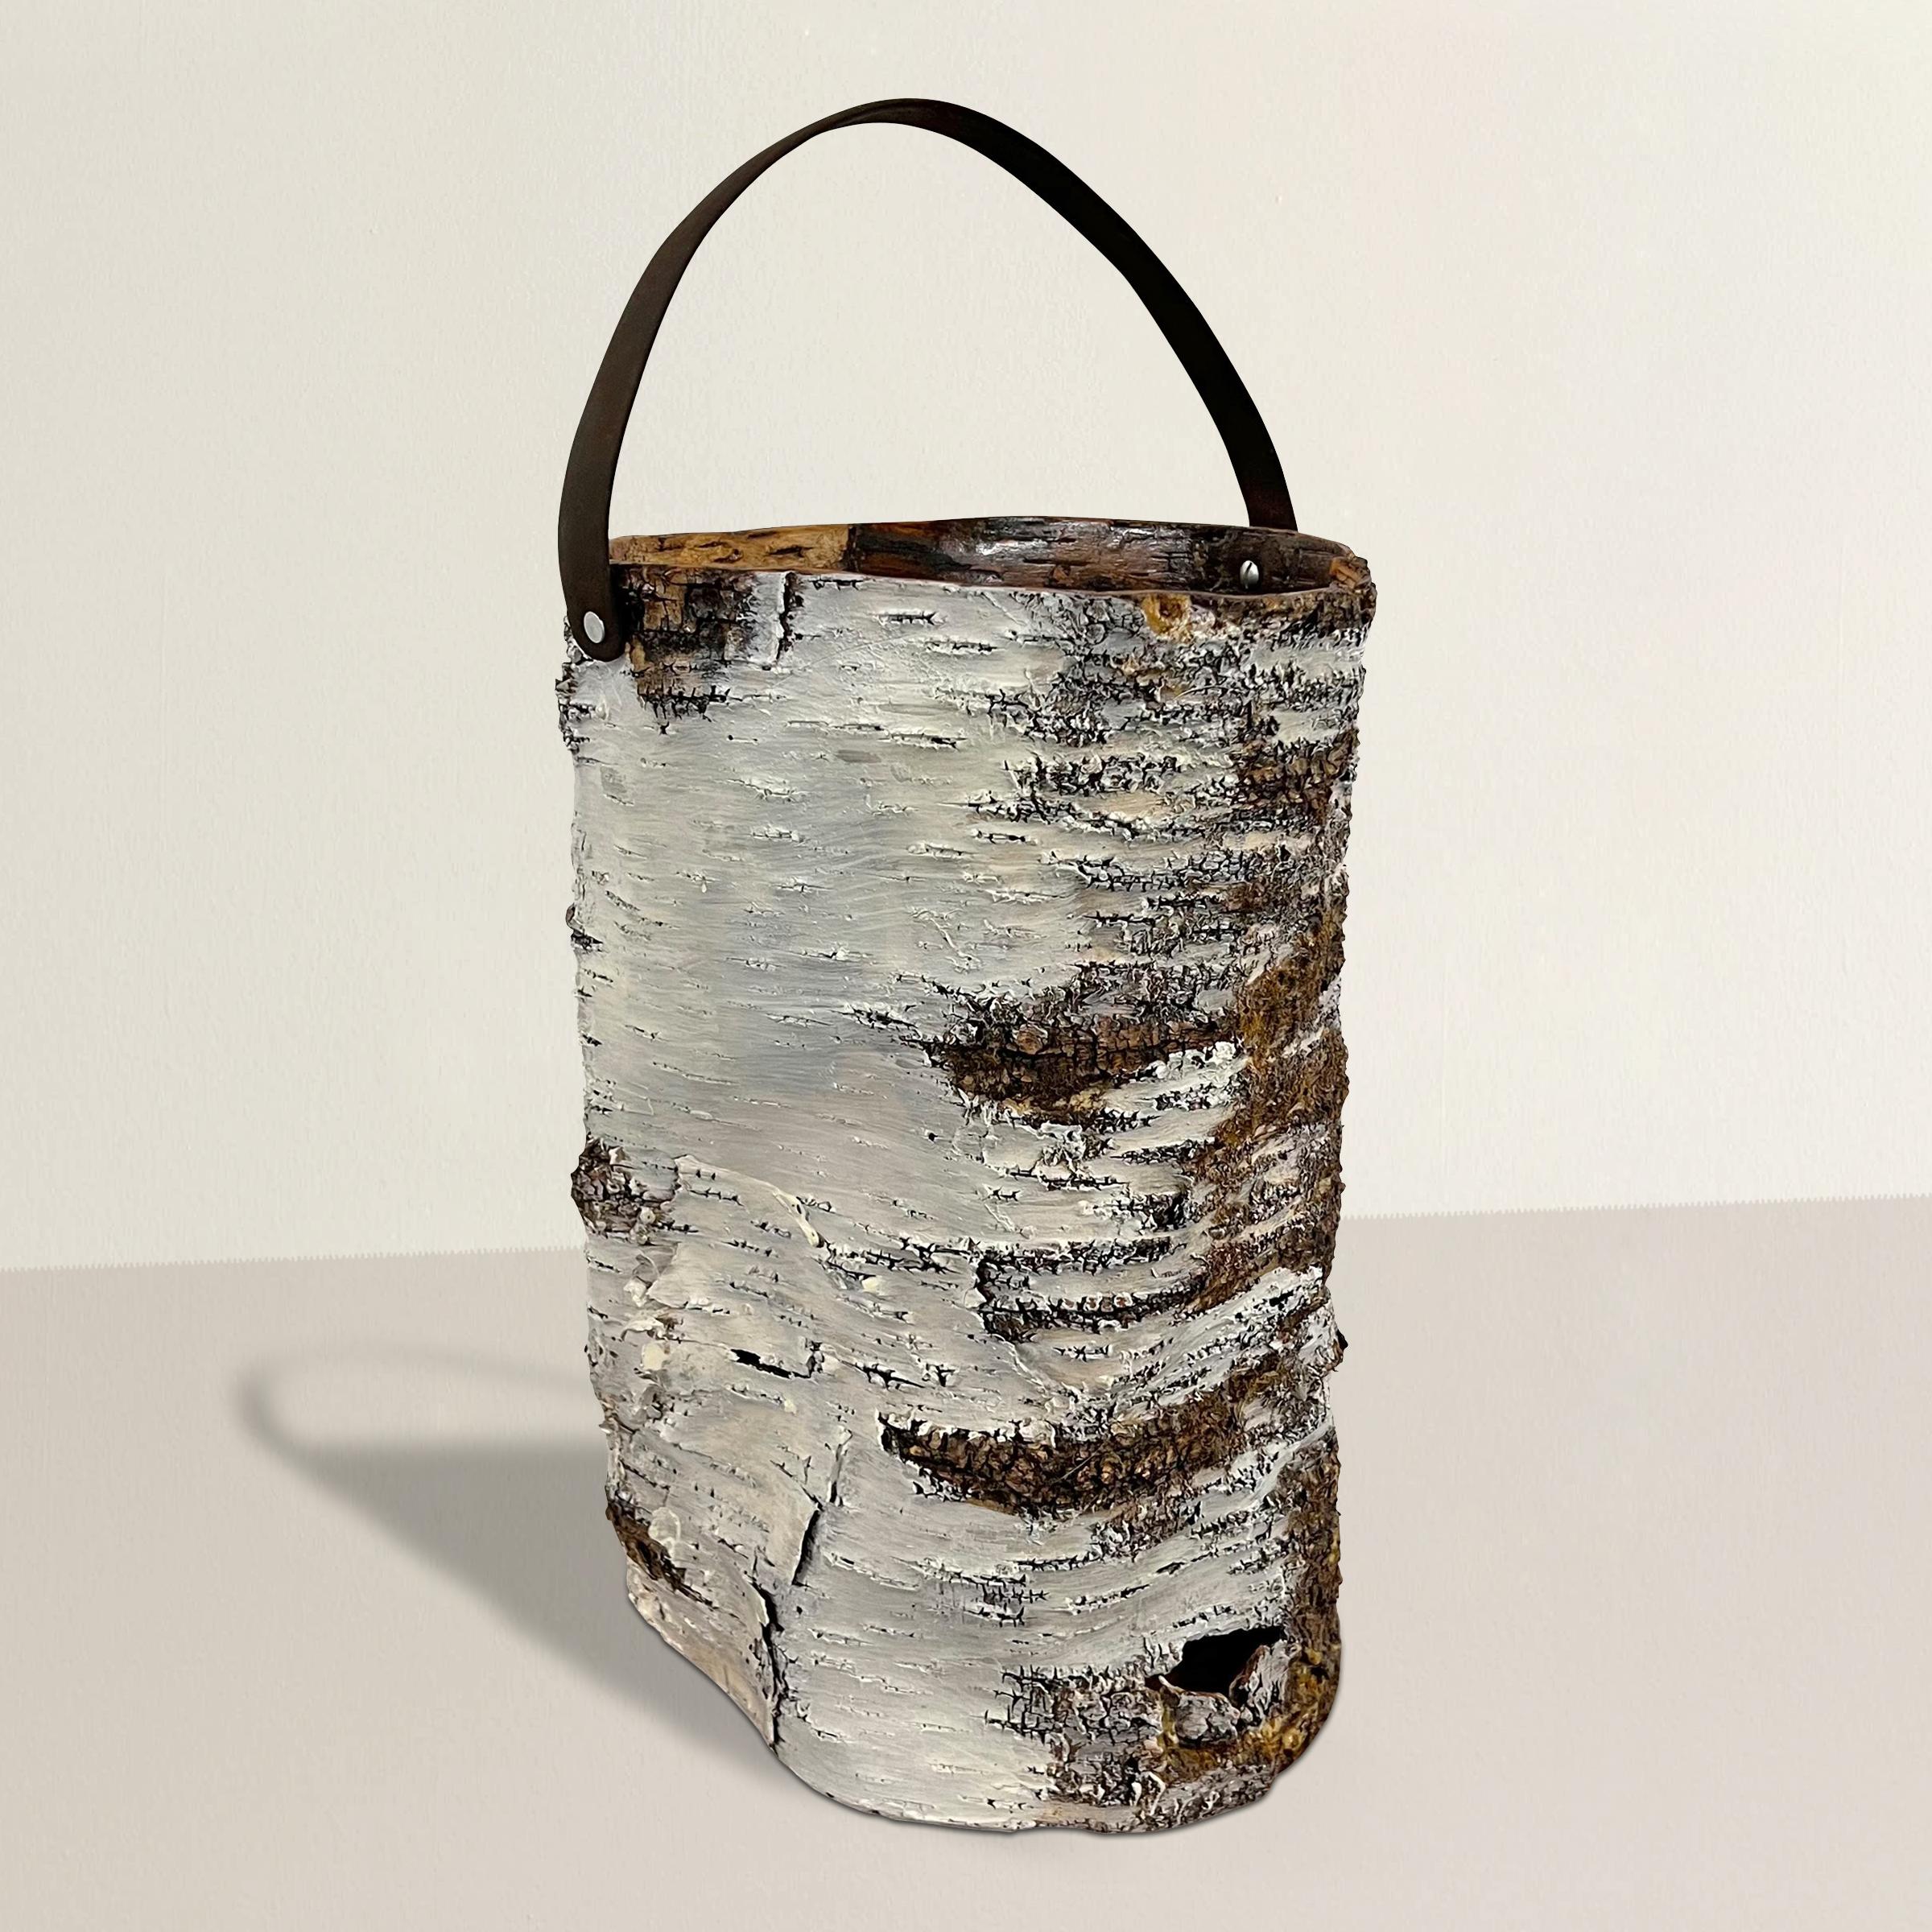 Indulge in the rustic elegance of this handmade birch bark bucket, discovered in the heart of Wisconsin. Inspired by the time-honored traditions of Native American basketry in the region, this exquisite piece seamlessly blends history with modern